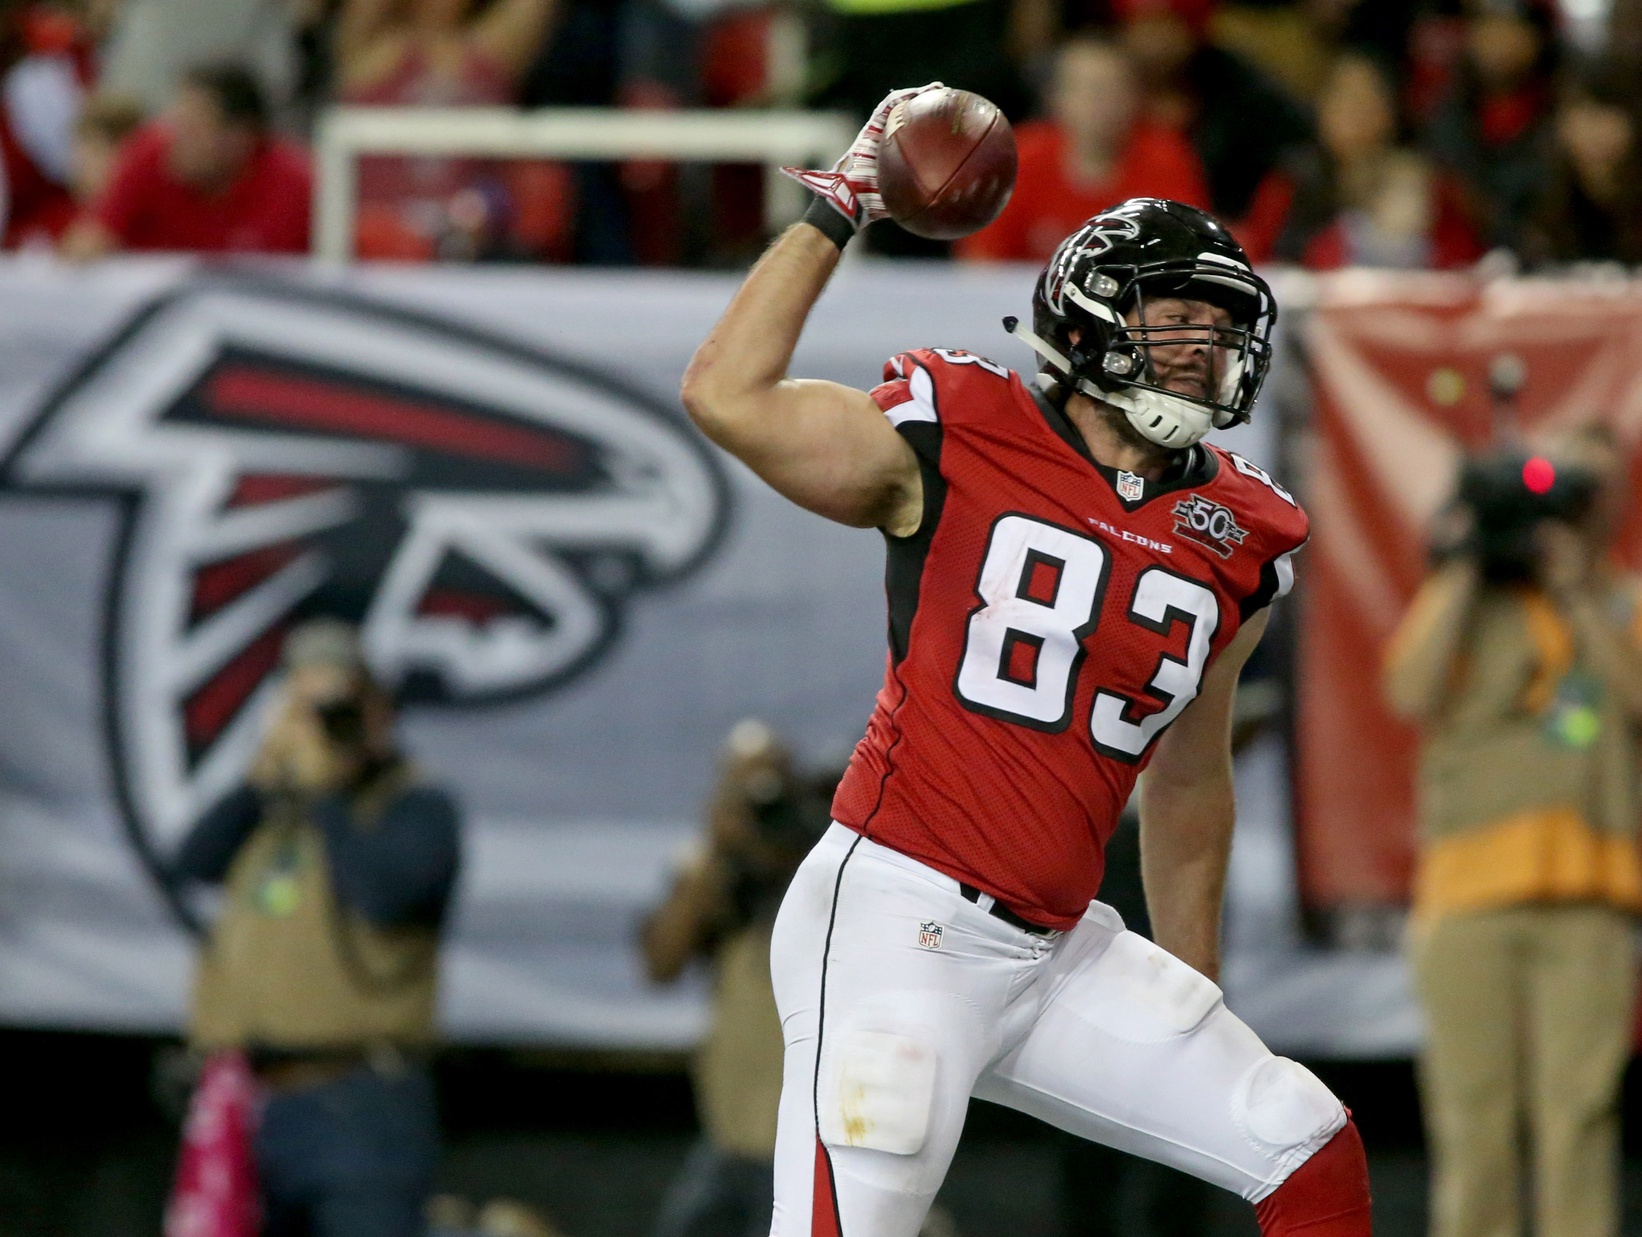 Nov 1, 2015; Atlanta, GA, USA; Atlanta Falcons tight end Jacob Tamme (83) celebrates his touchdown catch in the third quarter of their game against the Tampa Bay Buccaneers at the Georgia Dome. The Buccaneers won 23-20 in overtime. Mandatory Credit: Jason Getz-USA TODAY Sports